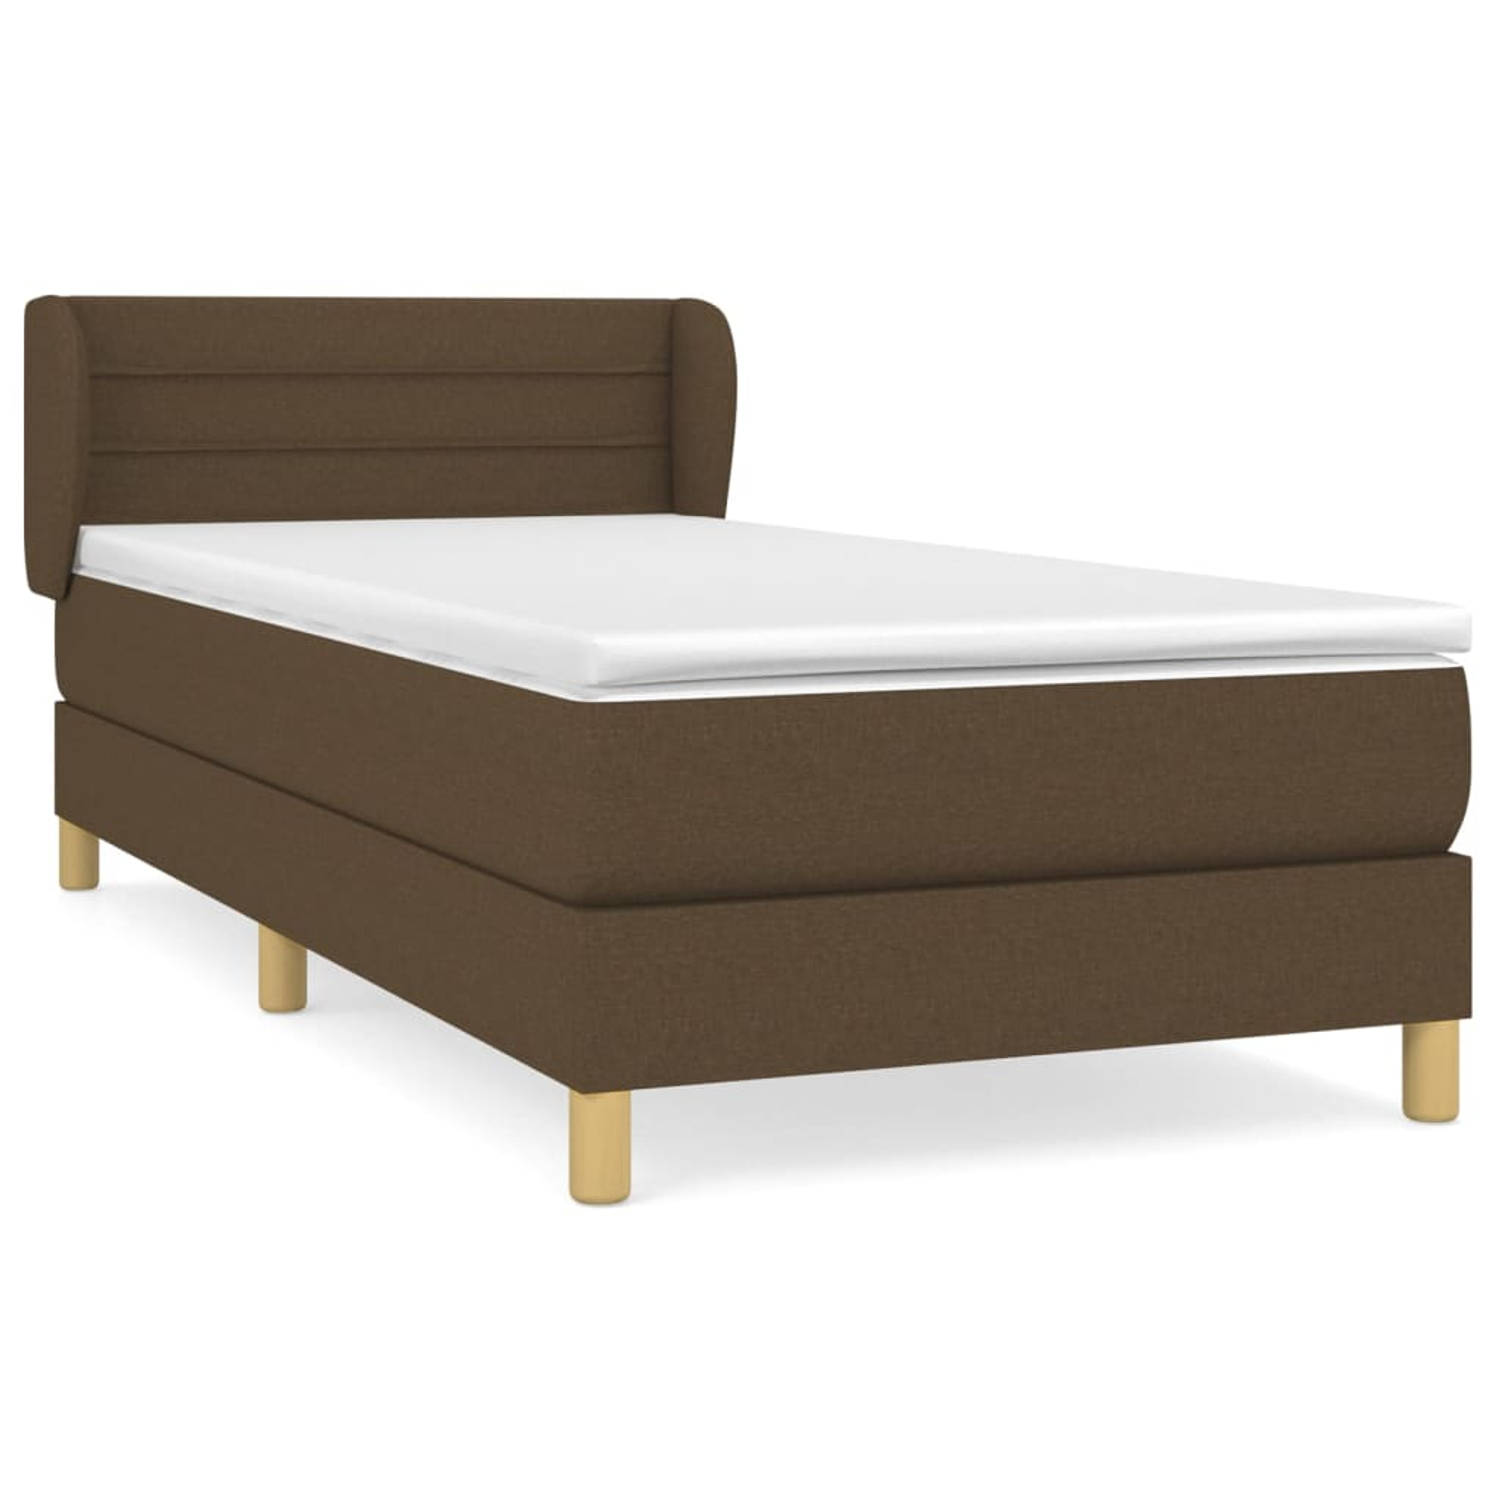 The Living Store Boxspringbed - Modern - Bed - 203 x 83 x 78/88 cm - Duurzaam materiaal